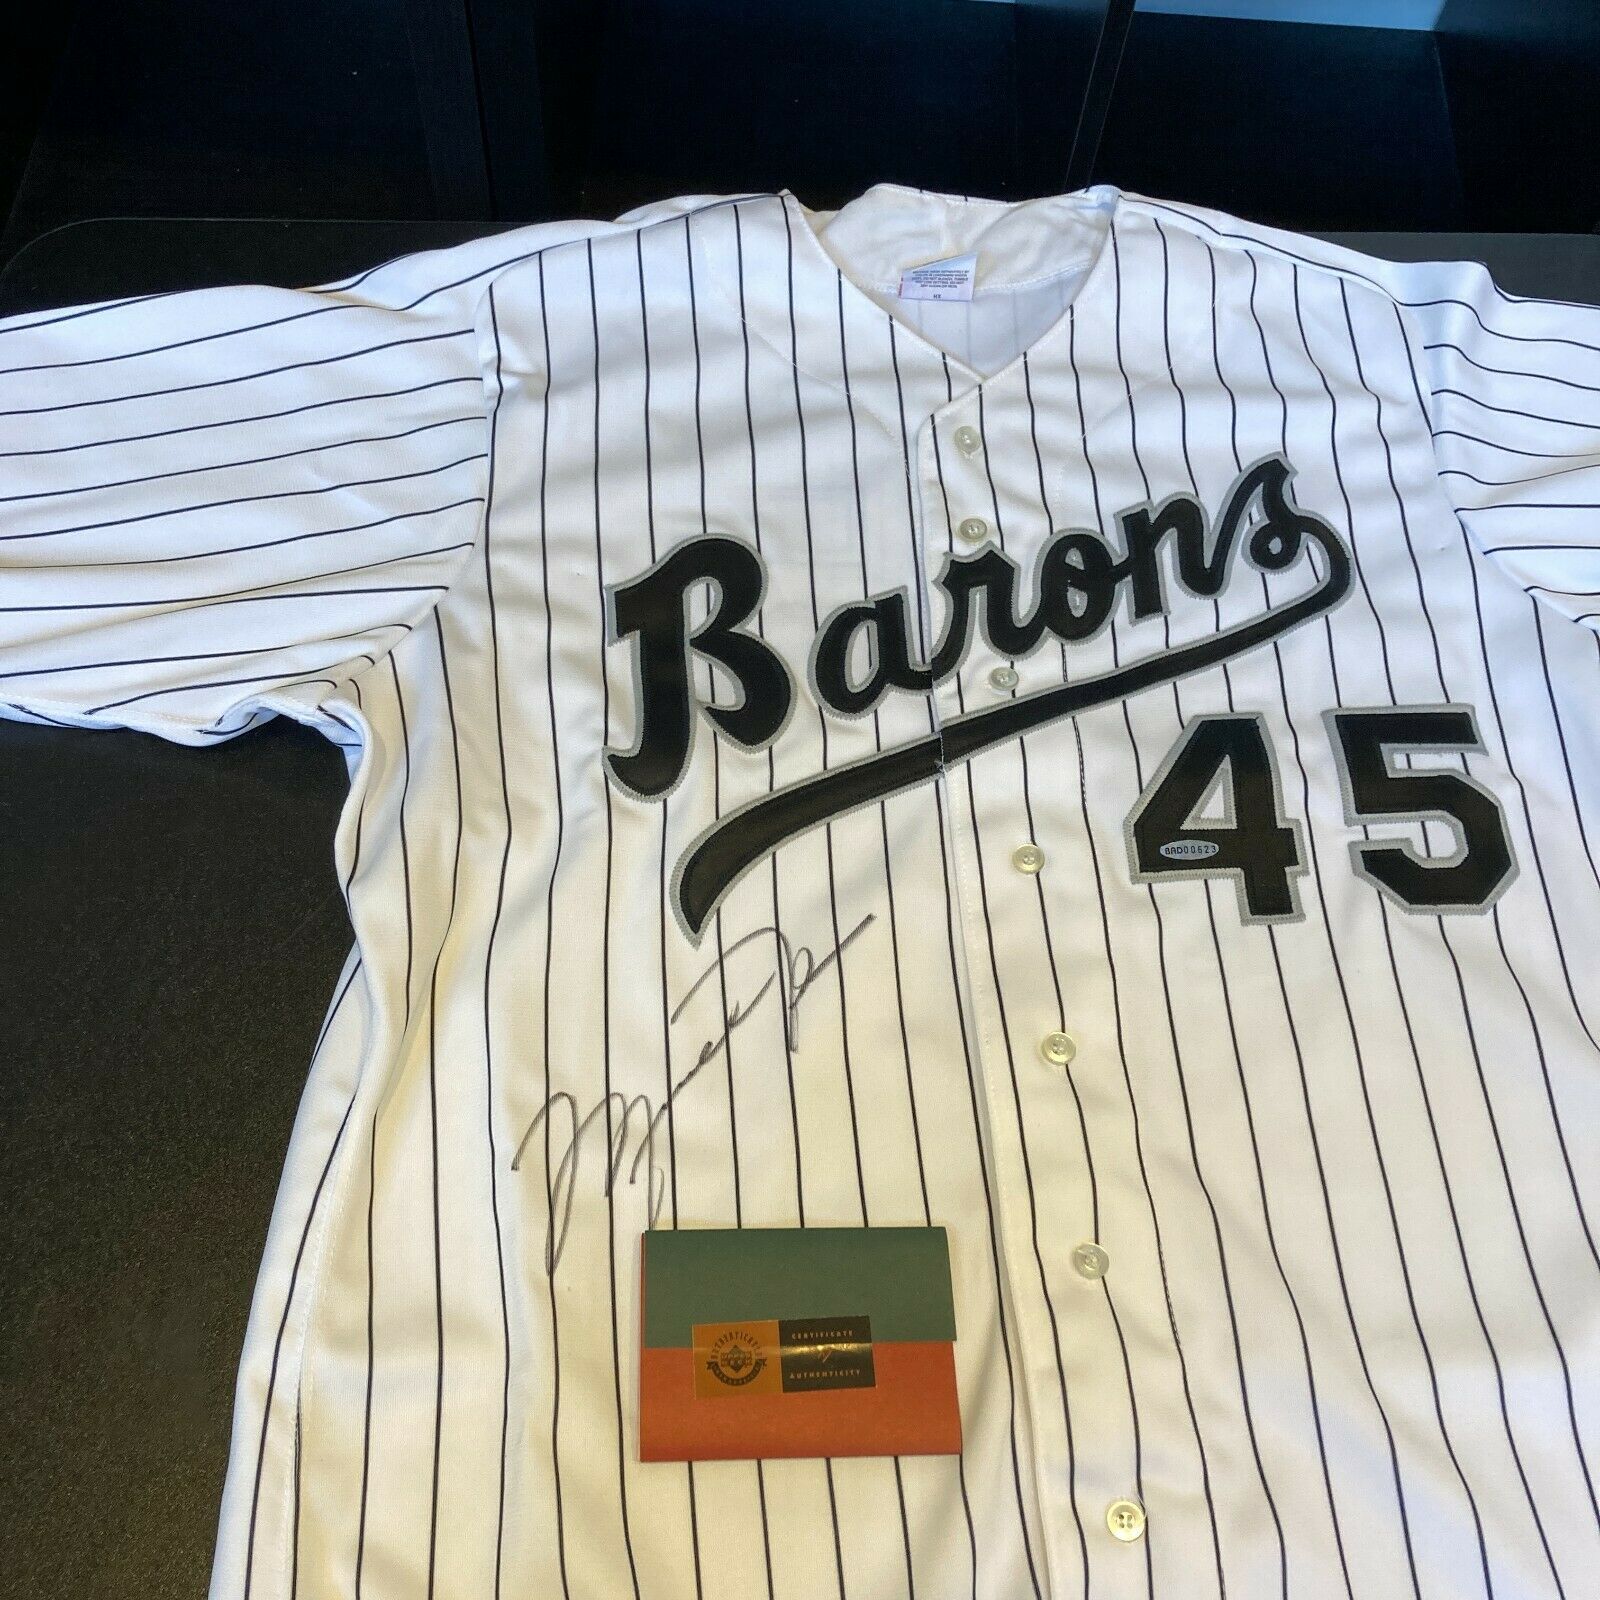 Autographed Chicago White Sox Michael Jordan White Jersey - Limited Edition  164 of 250 - Upper Deck